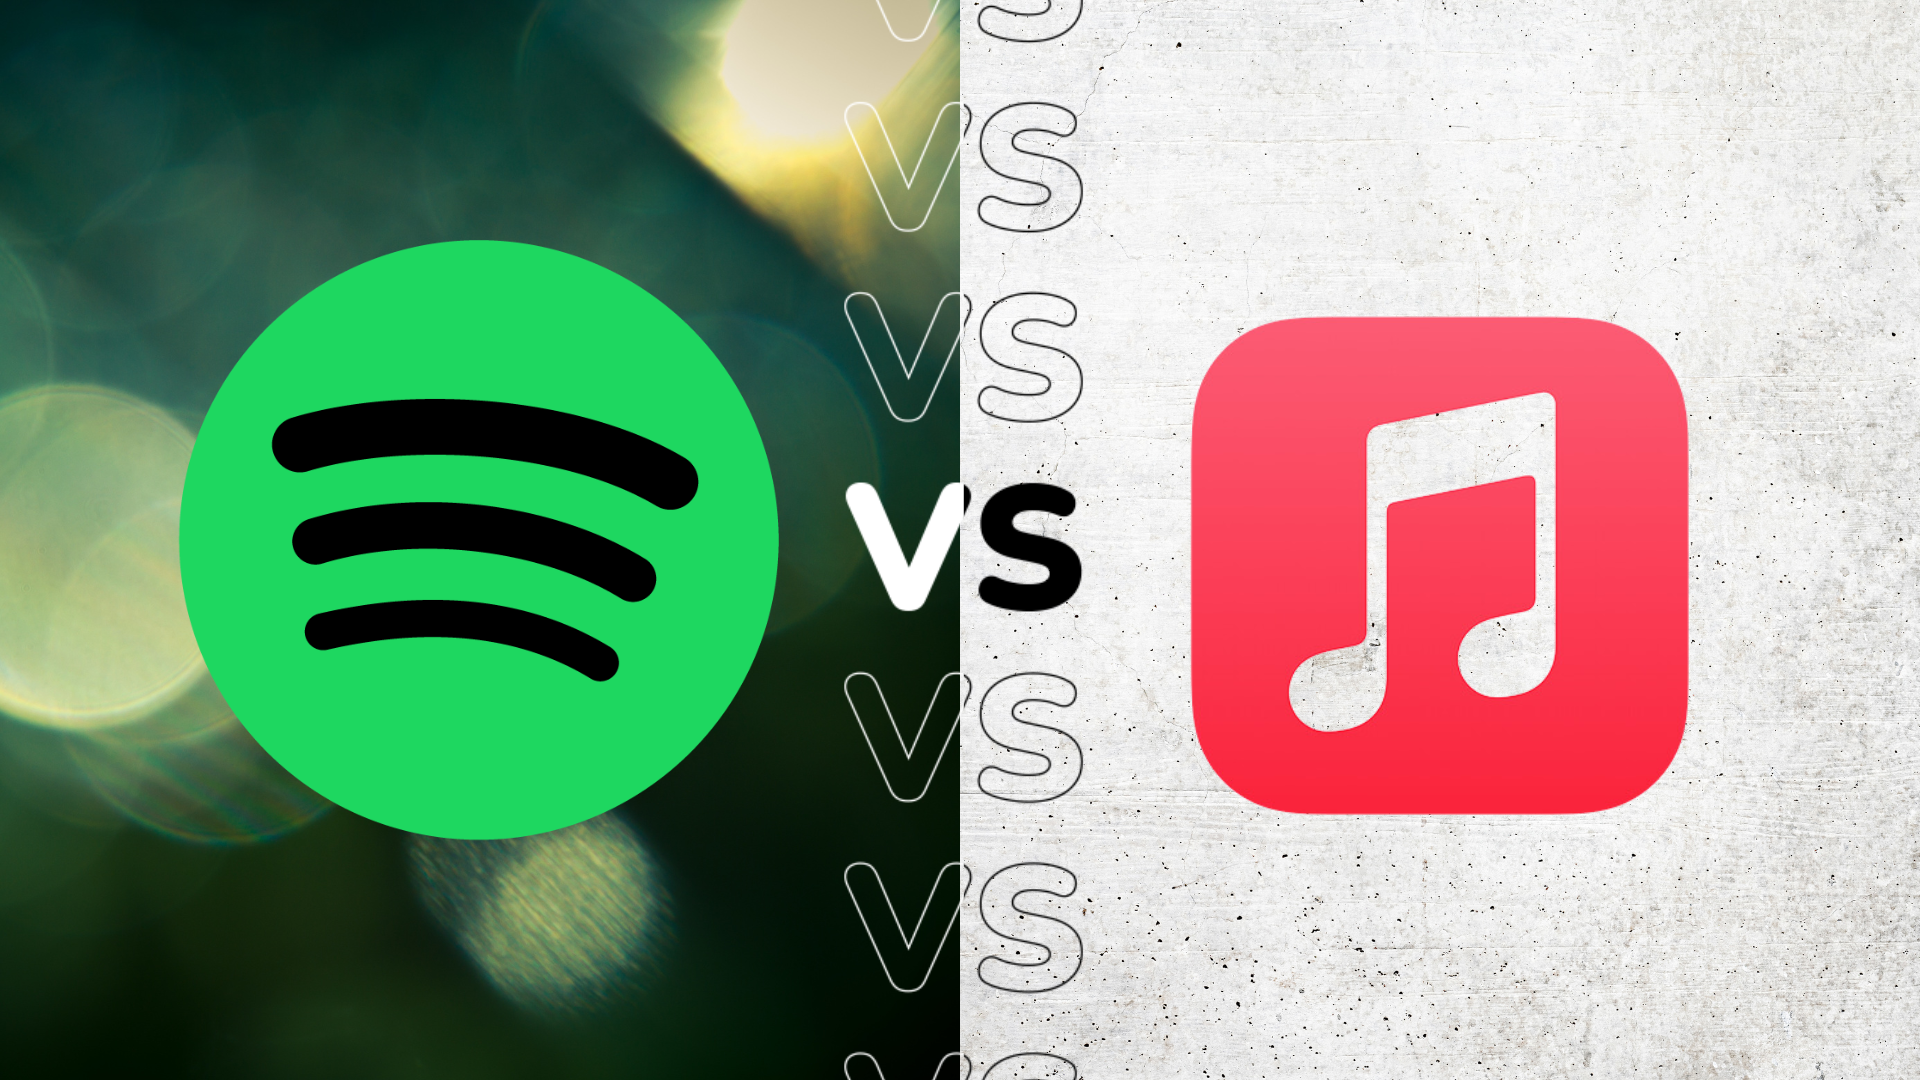 Apple Music vs Spotify: Which is better?